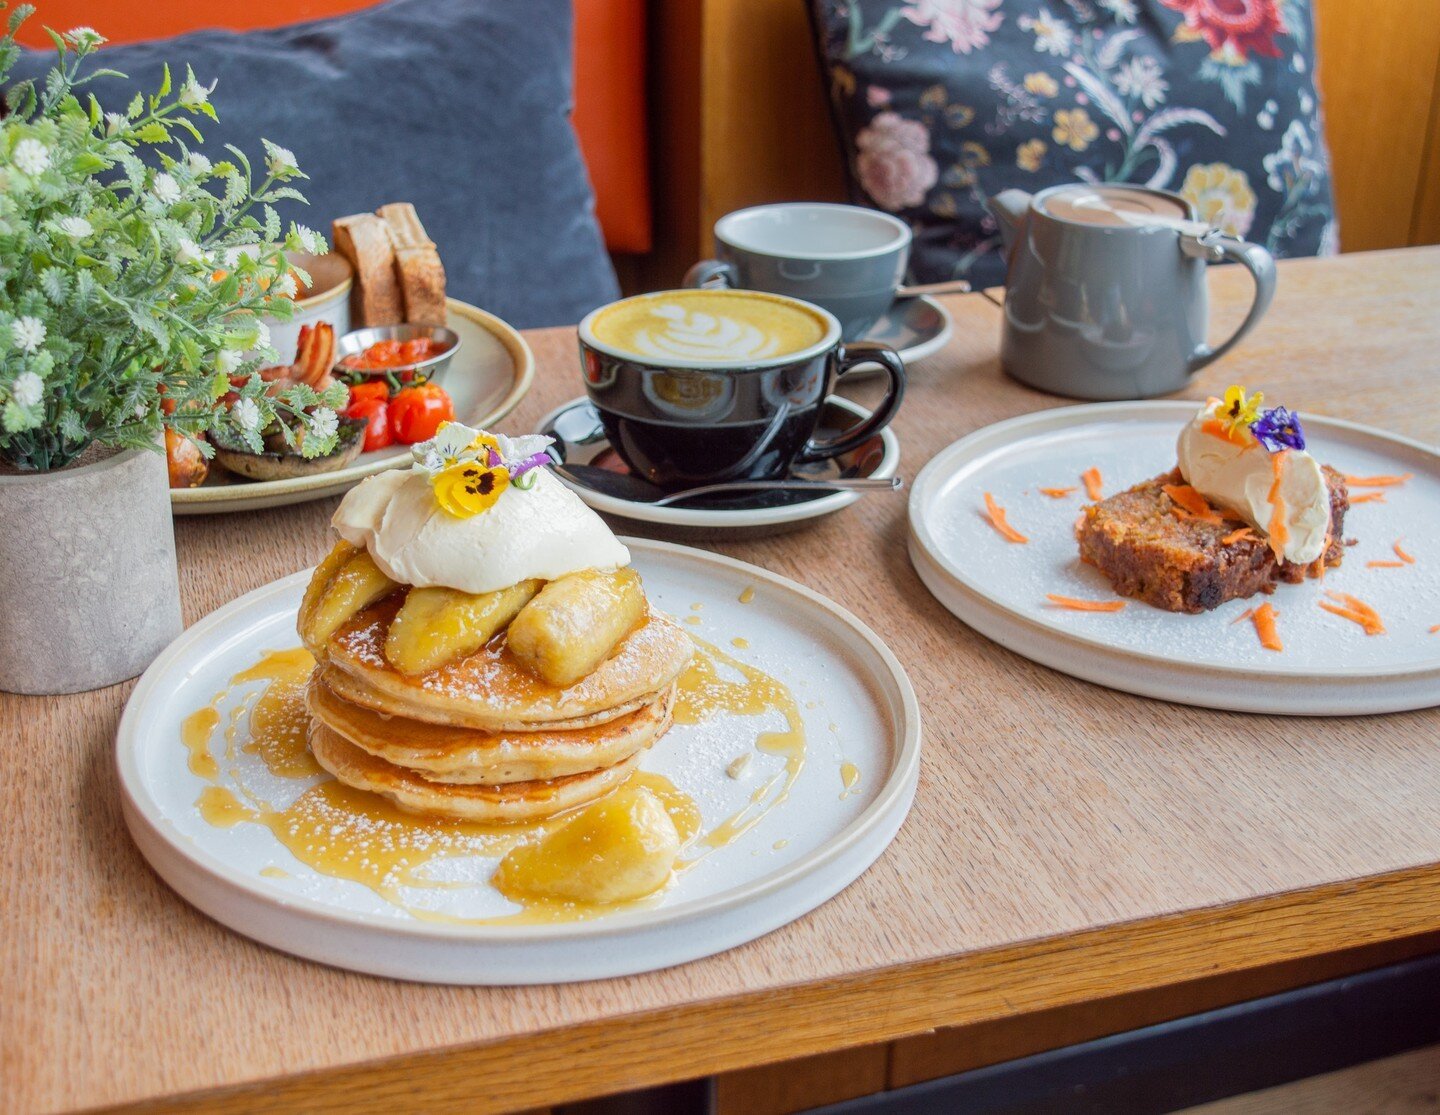 Saturday brunch is served!
Join us this weekend for an amazing meal.☀️

Don't forget to share the love and tag us in your photos, we love seeing our customers enjoying their time at Bean &amp; Hop. 📸⁠